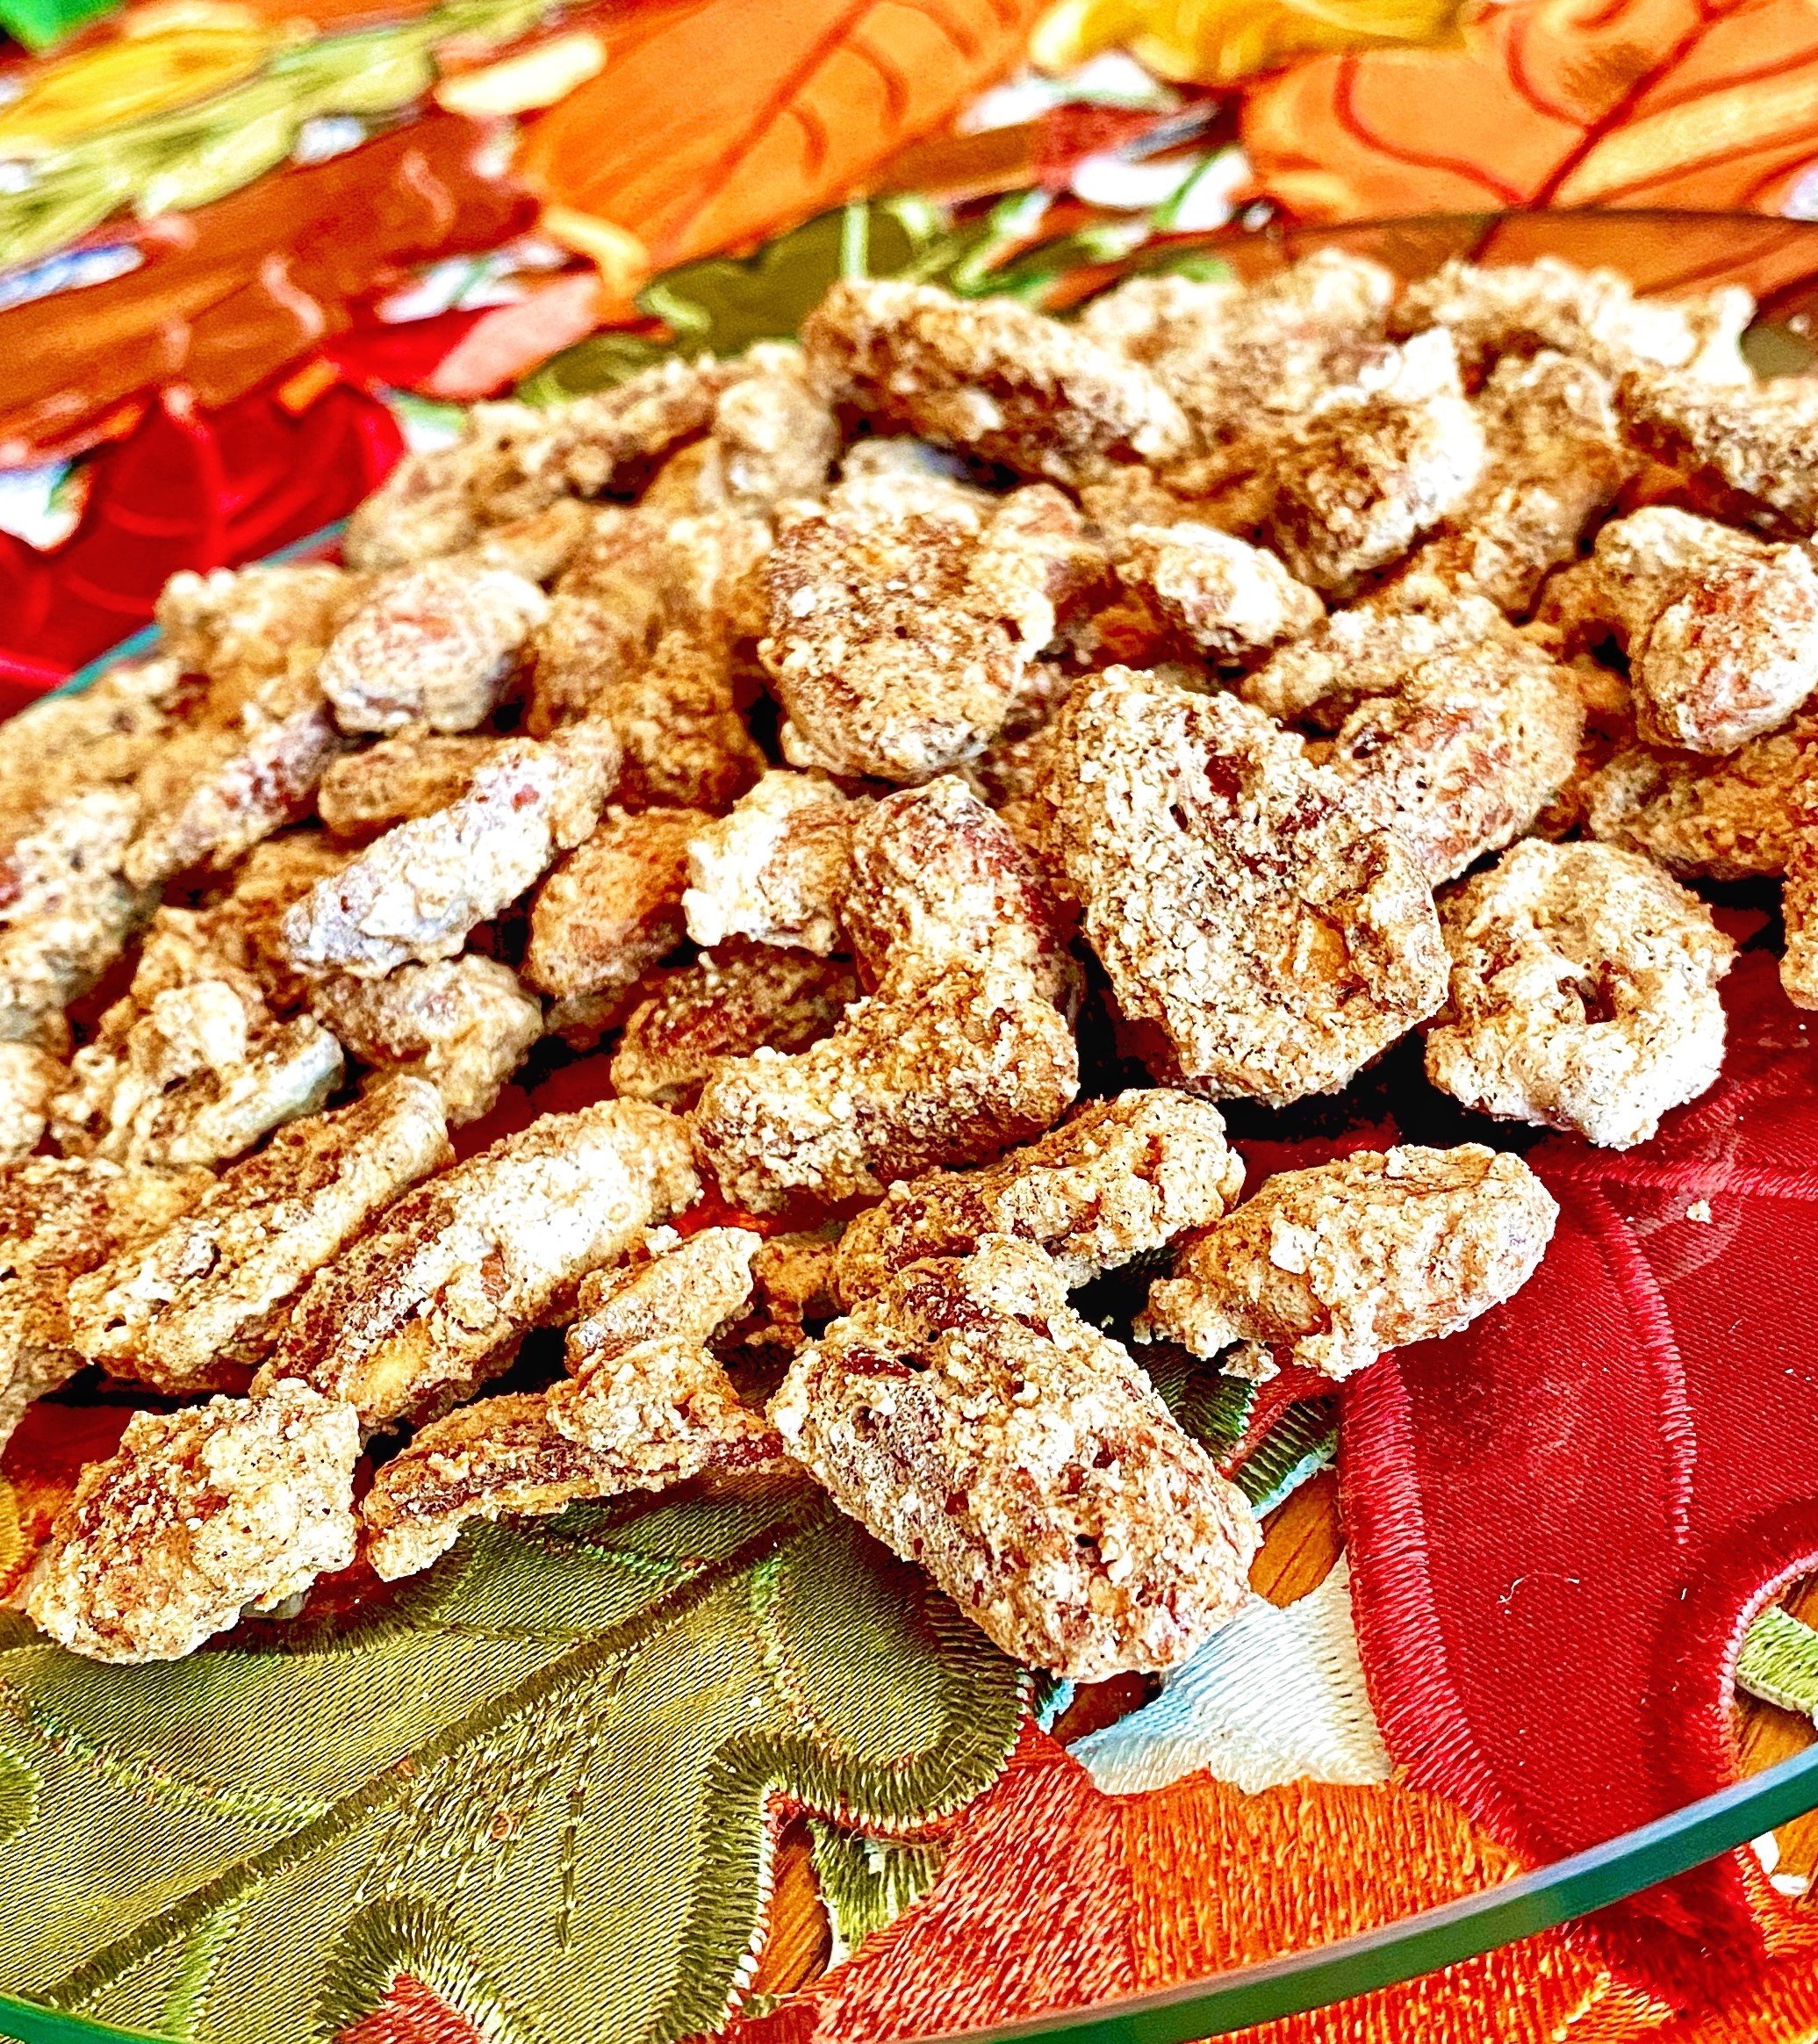 Cinnamon-Roasted Pecans and Almonds